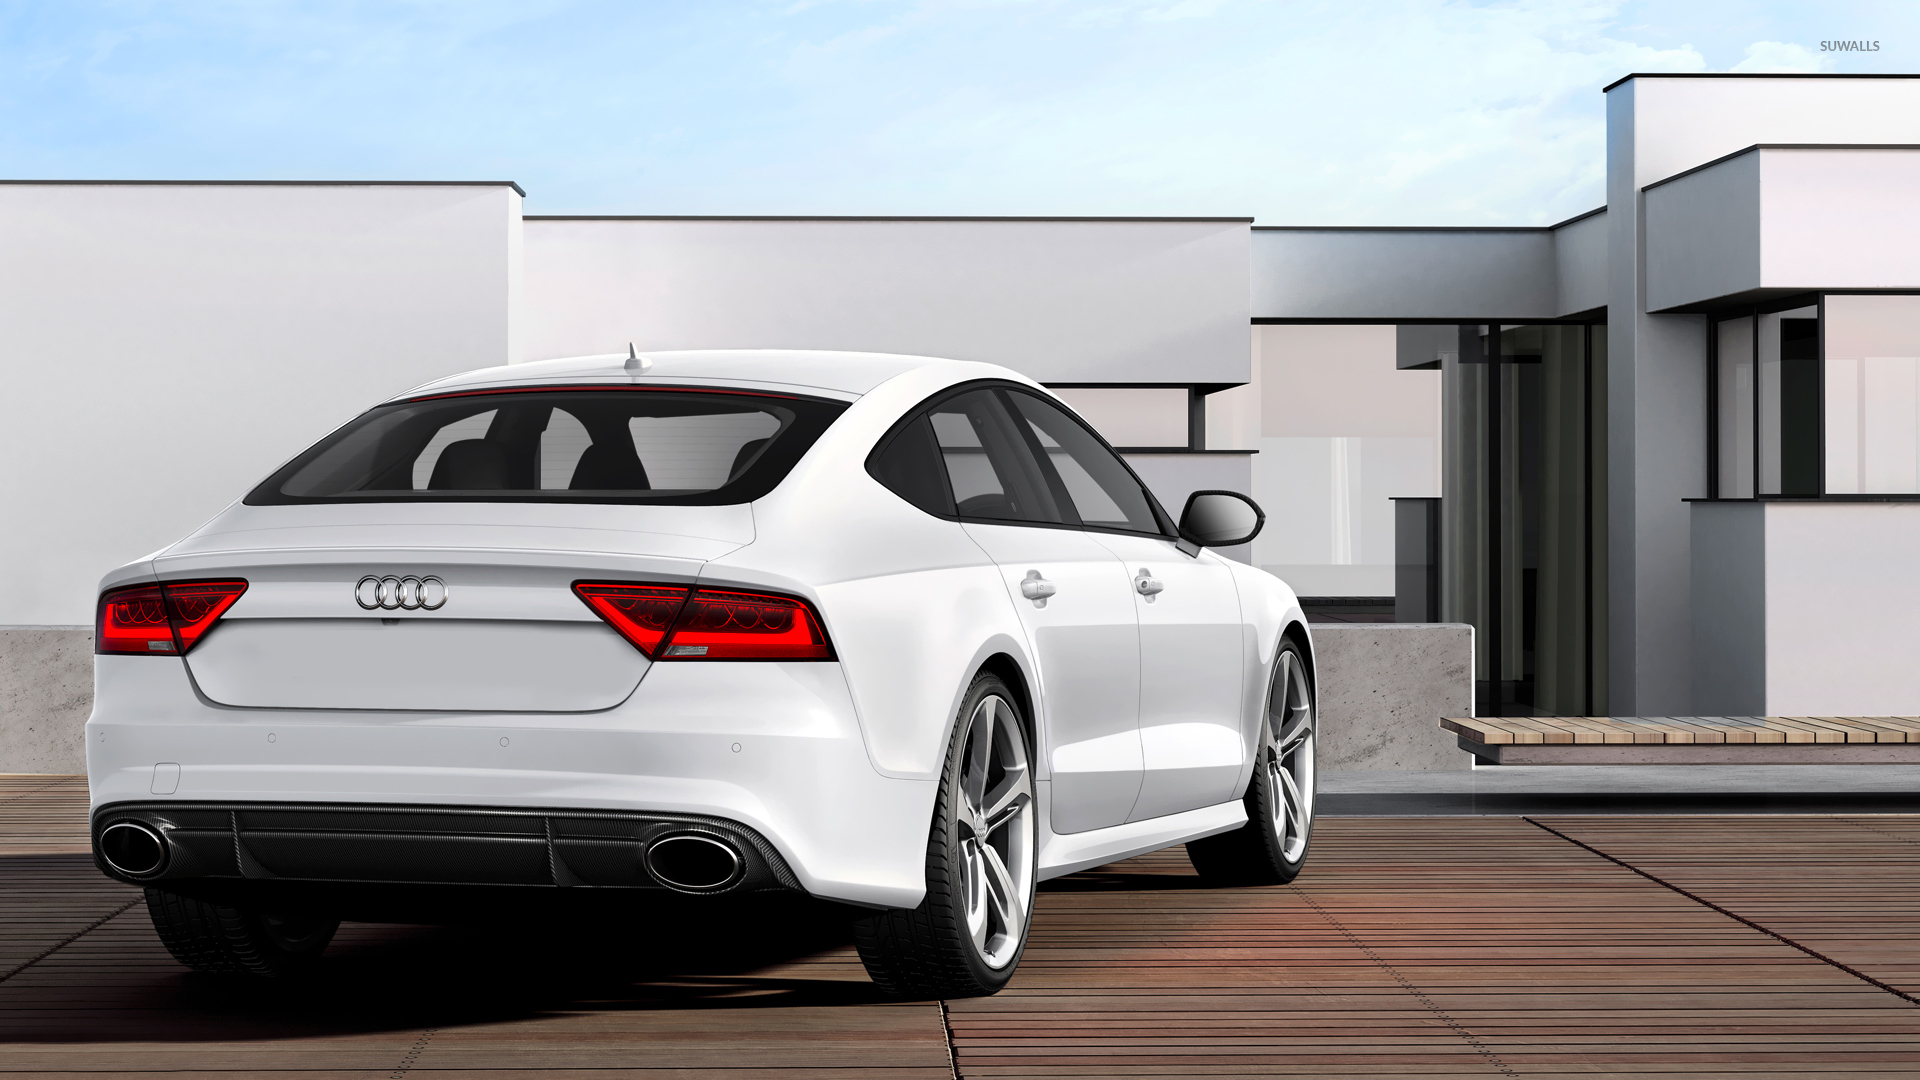 Back View Of A 2014 Audi Rs7 Sportback Wallpaper Audi Rs7